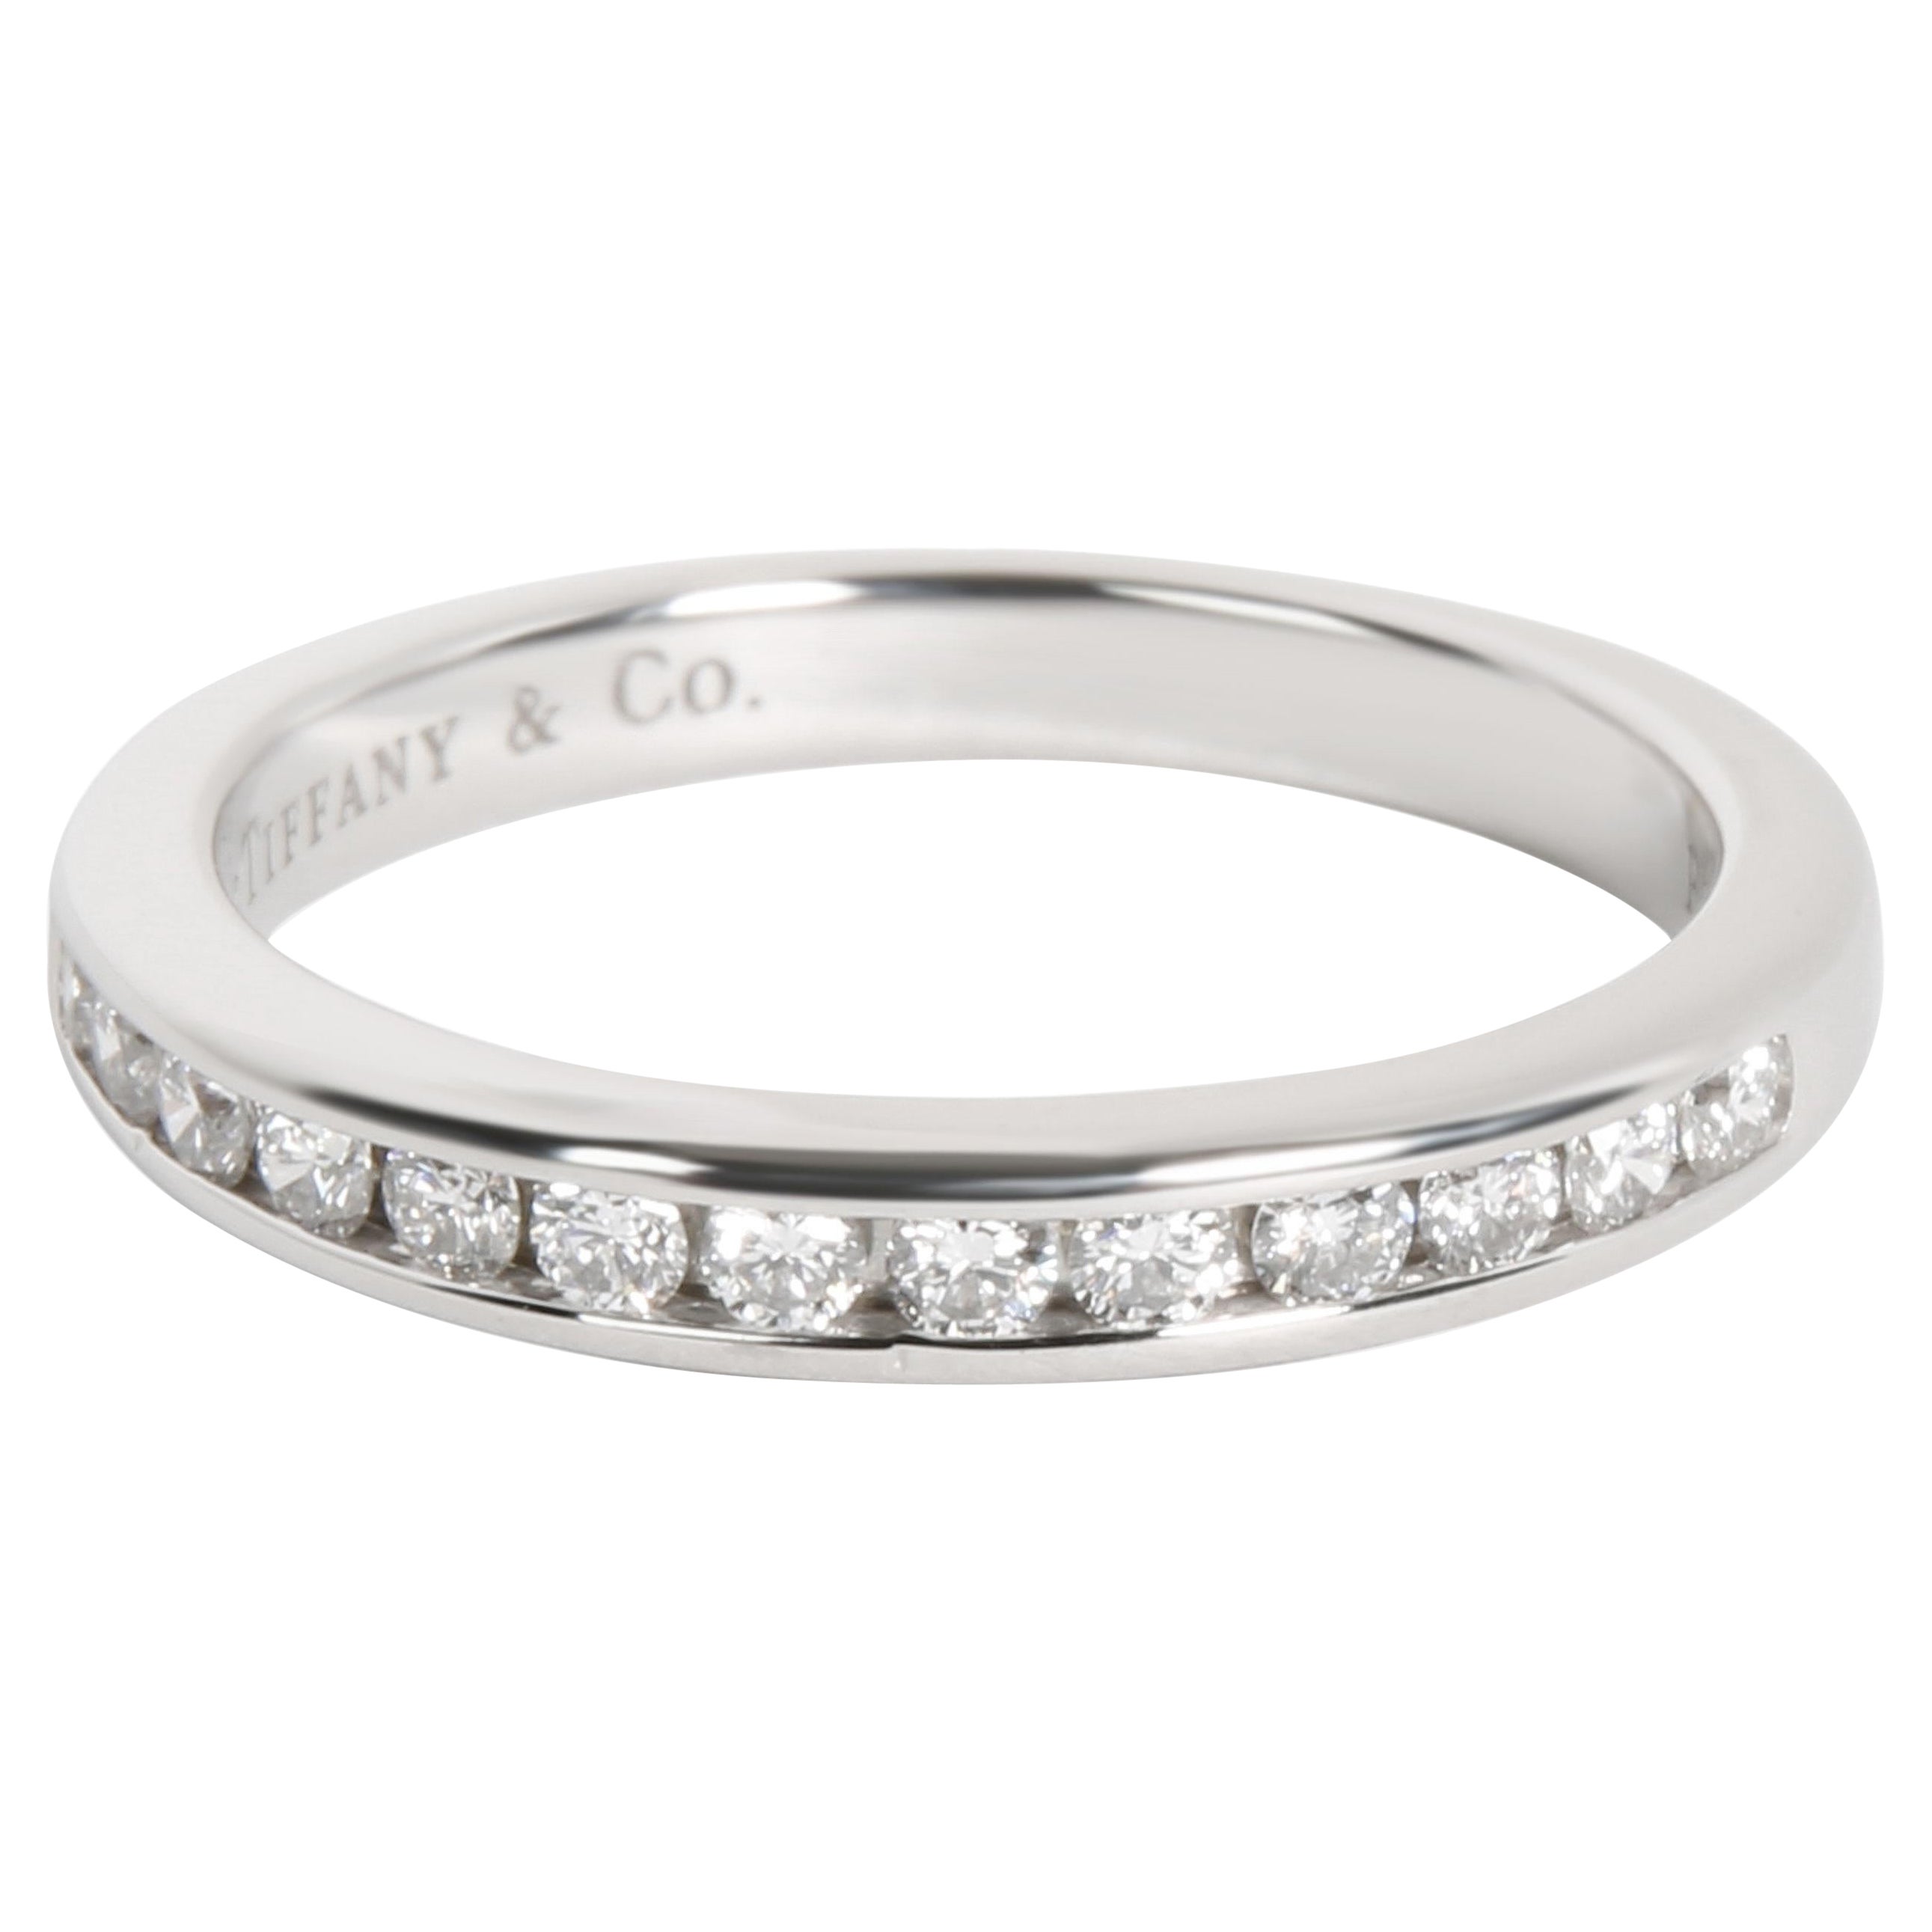 Tiffany & Co. Channel Set Diamond Wedding Band in Platinum 0.24 CTW For Sale